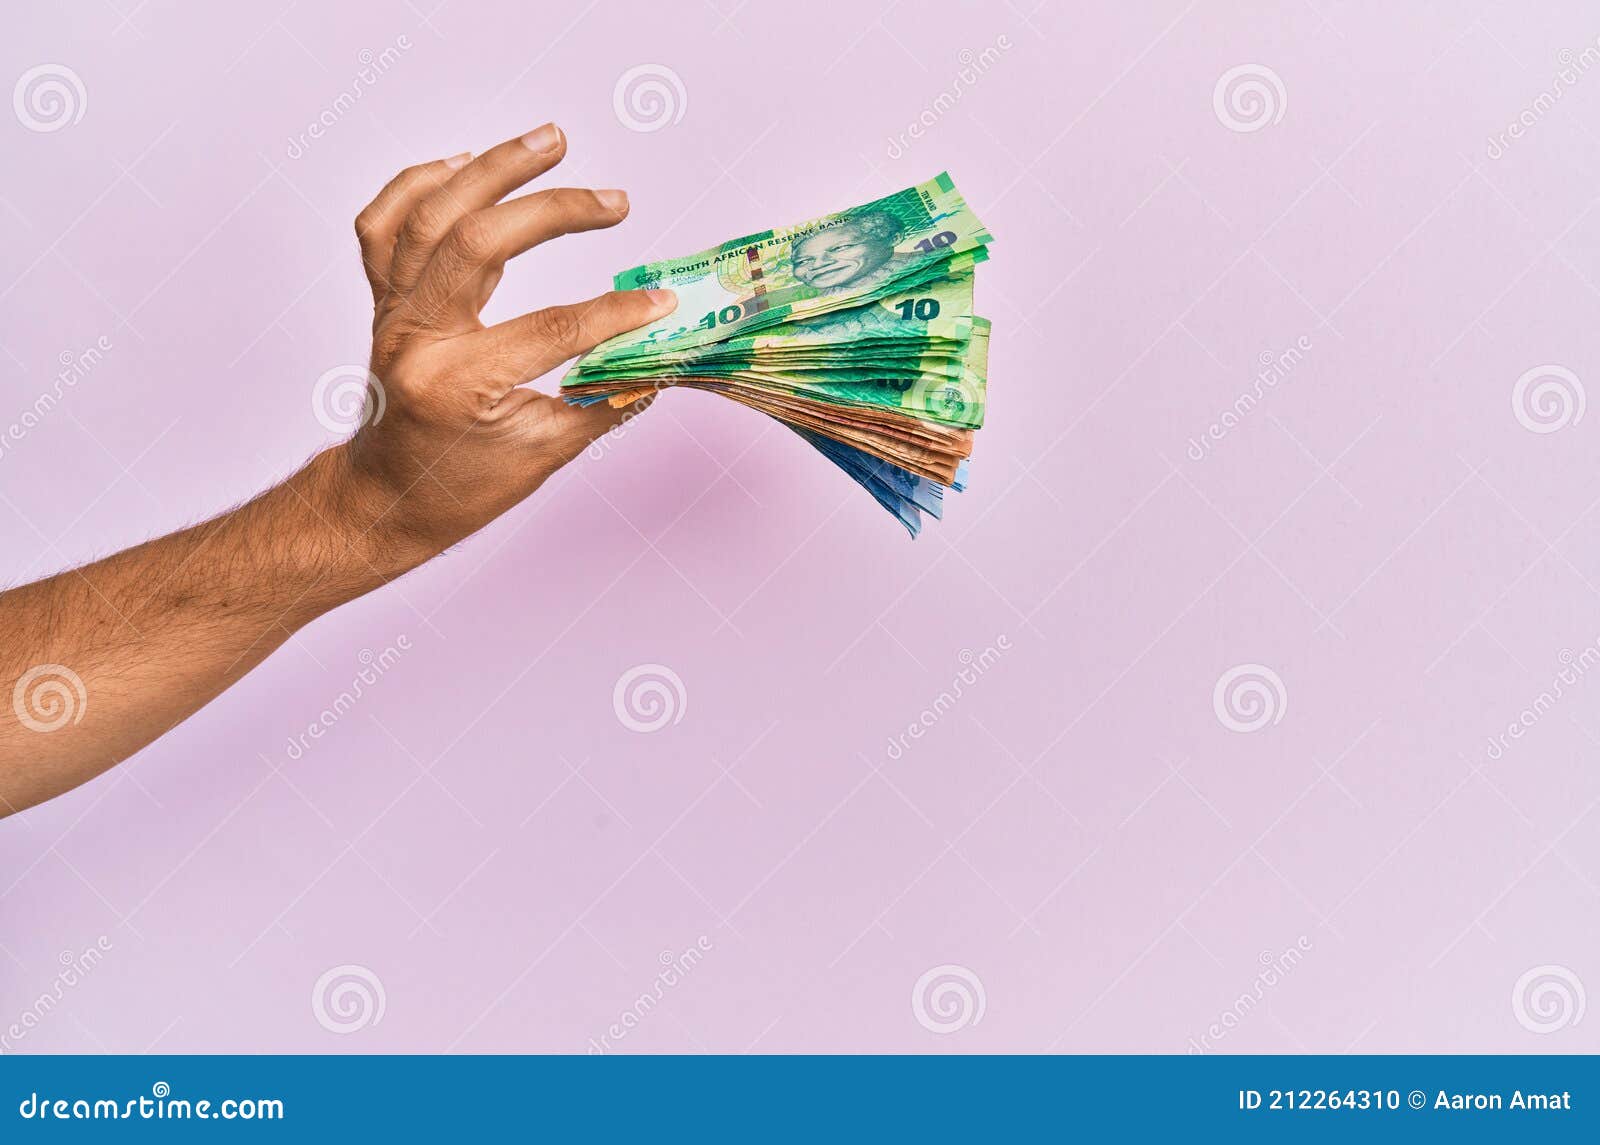 hispanic hand holding south africa rands banknotes over  pink background